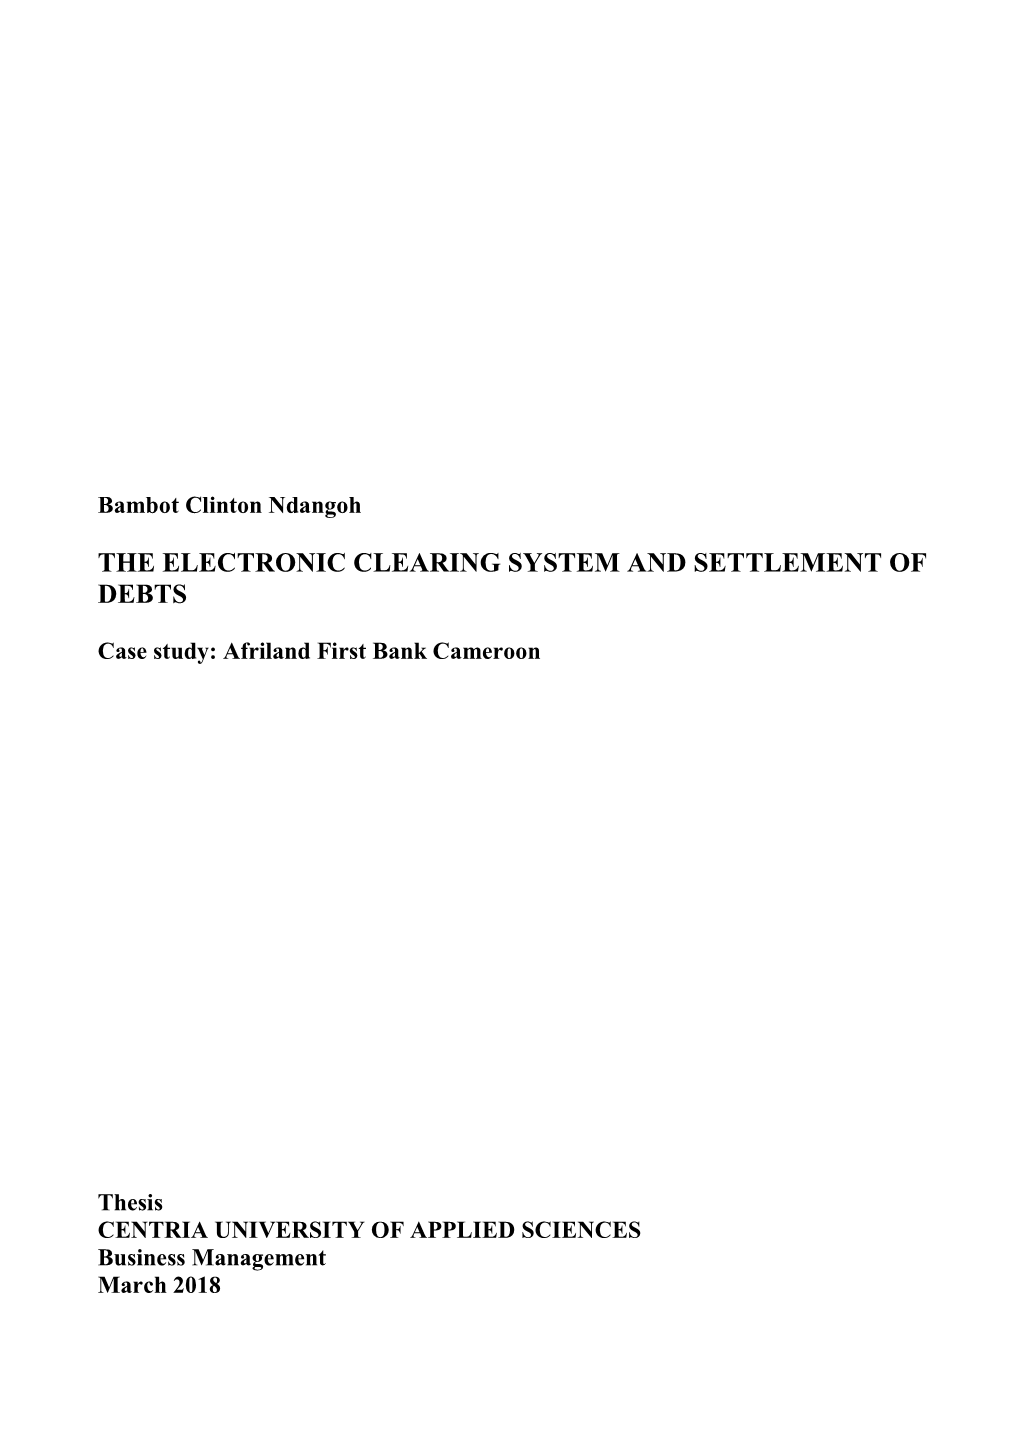 The Electronic Clearing System and Settlement of Debts